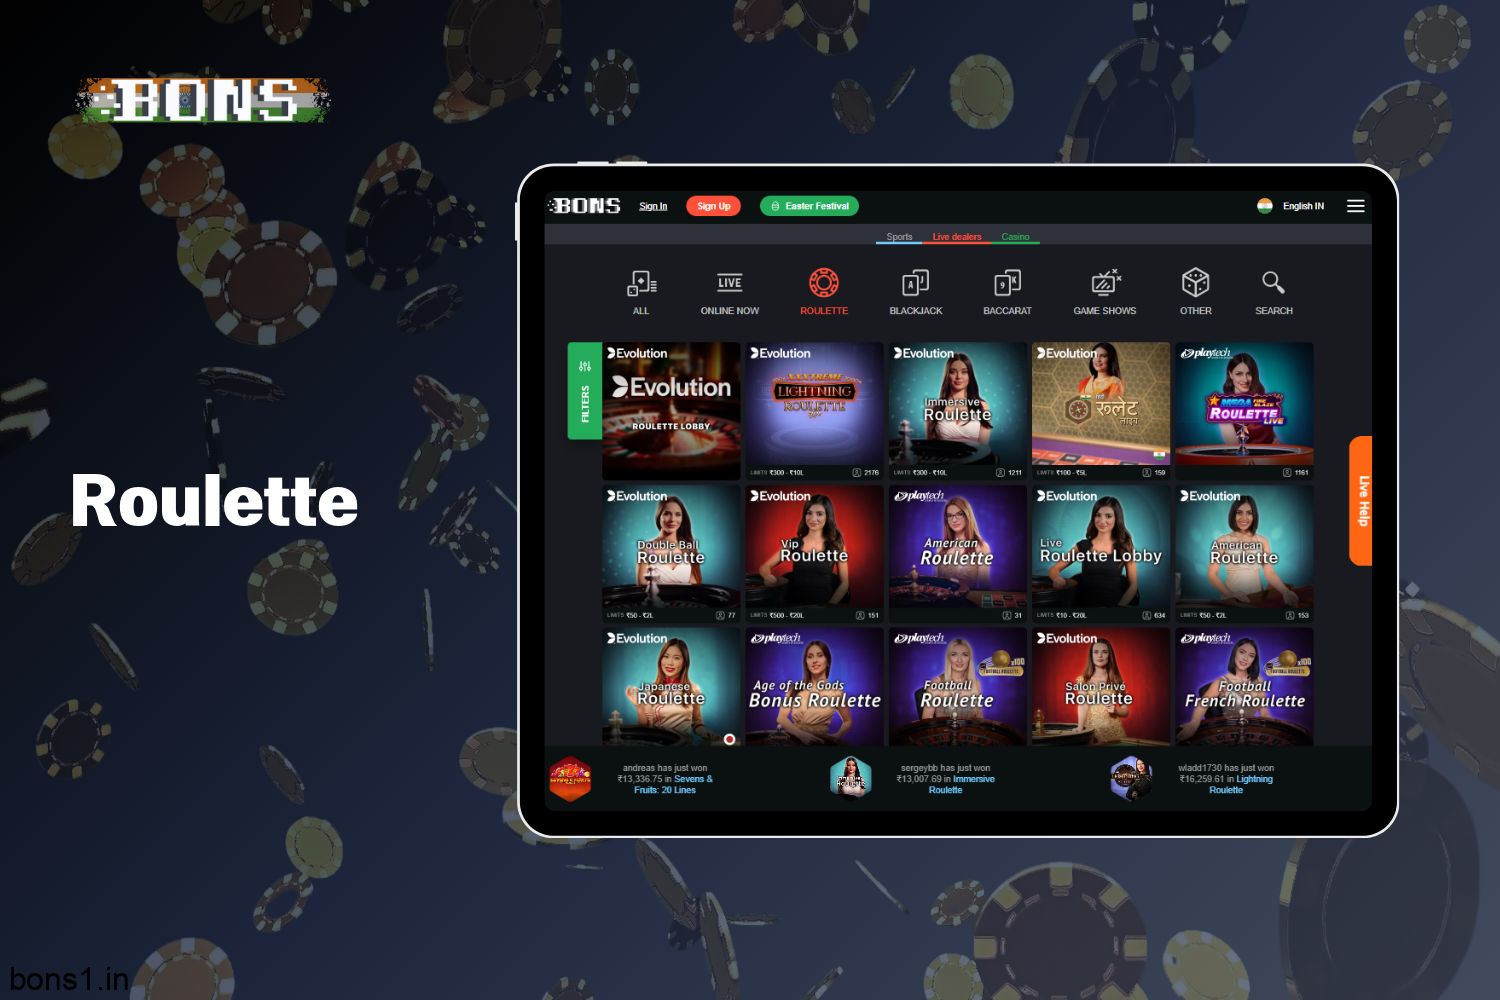 Bons Casino in the Live Casino section has a great selection of Roulette games for players from India